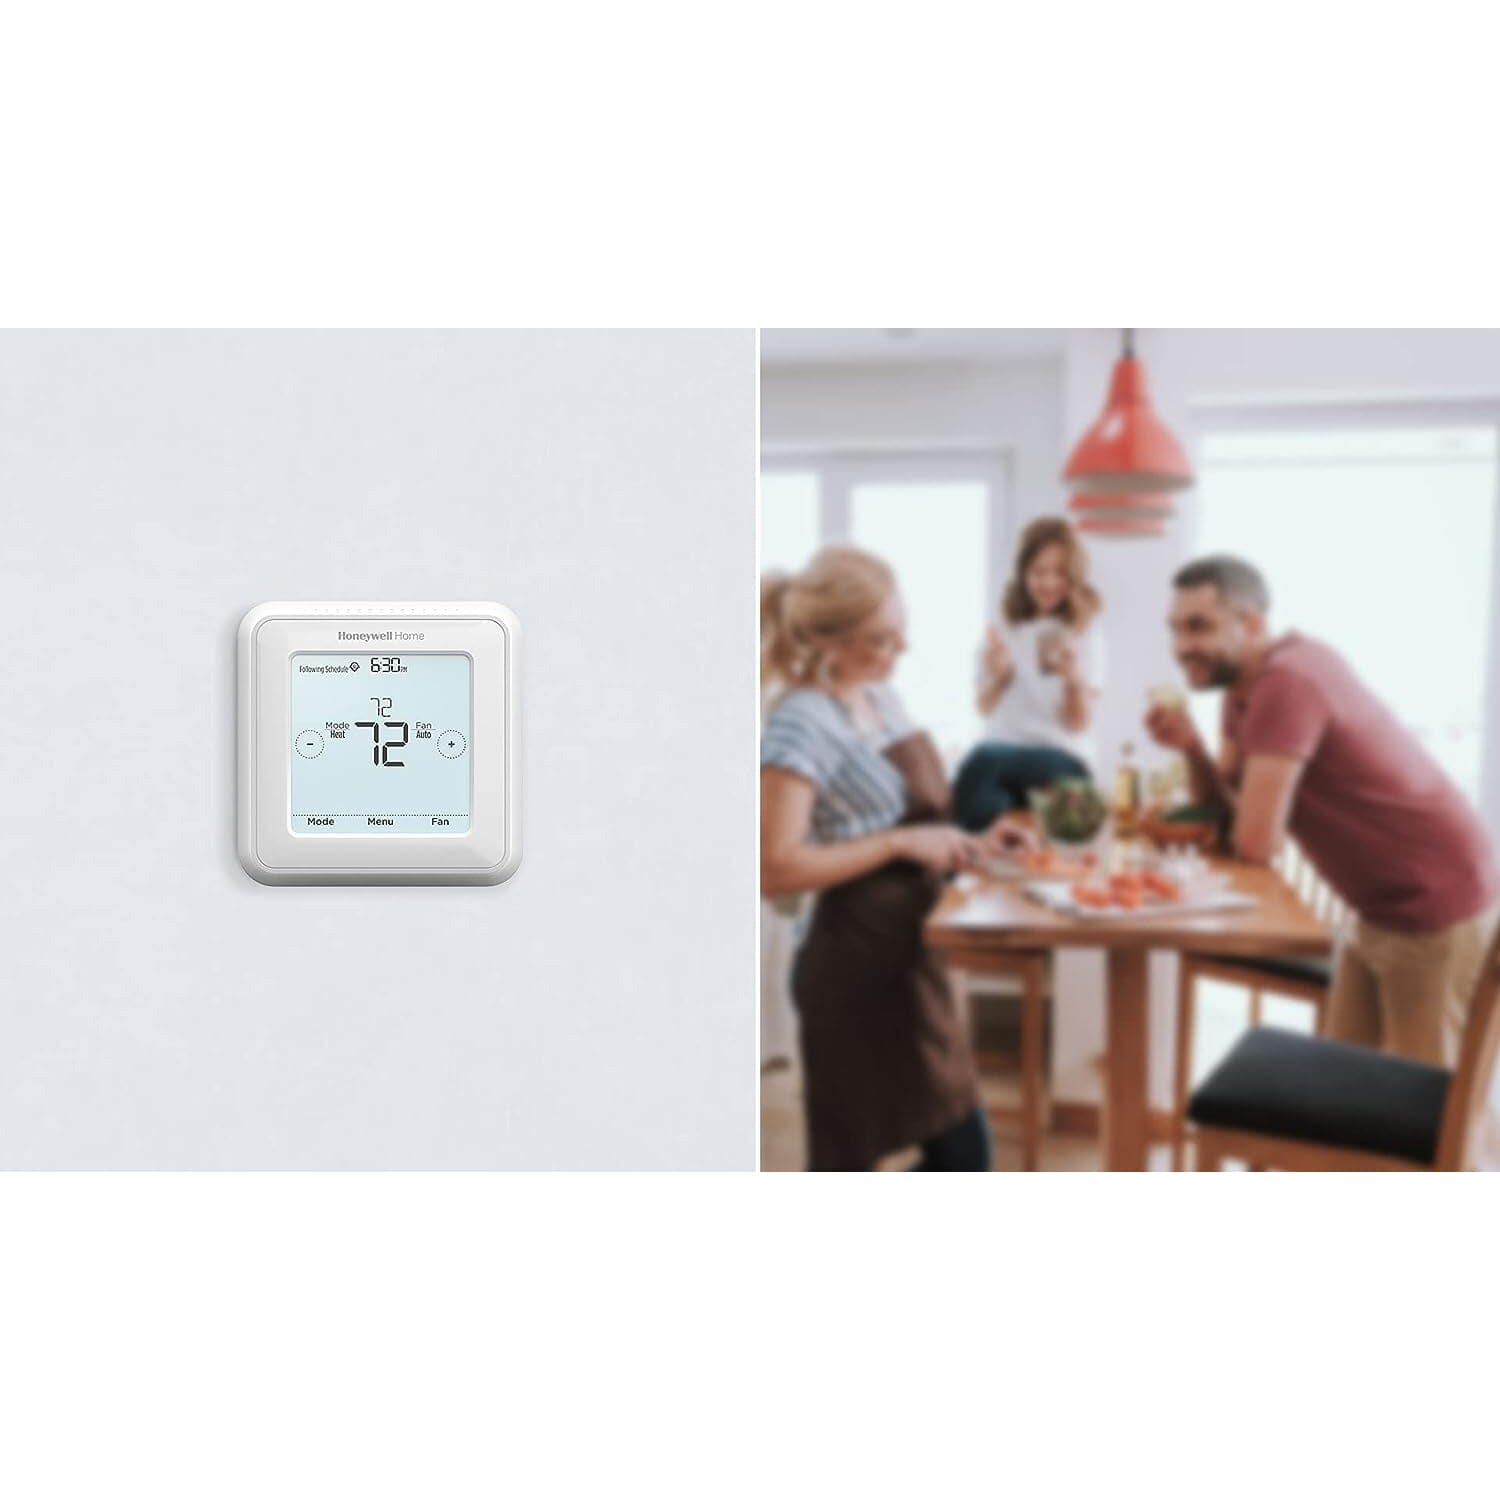 Honeywell Home RTH8560D 7-Day Programmable Touchscreen Thermostat